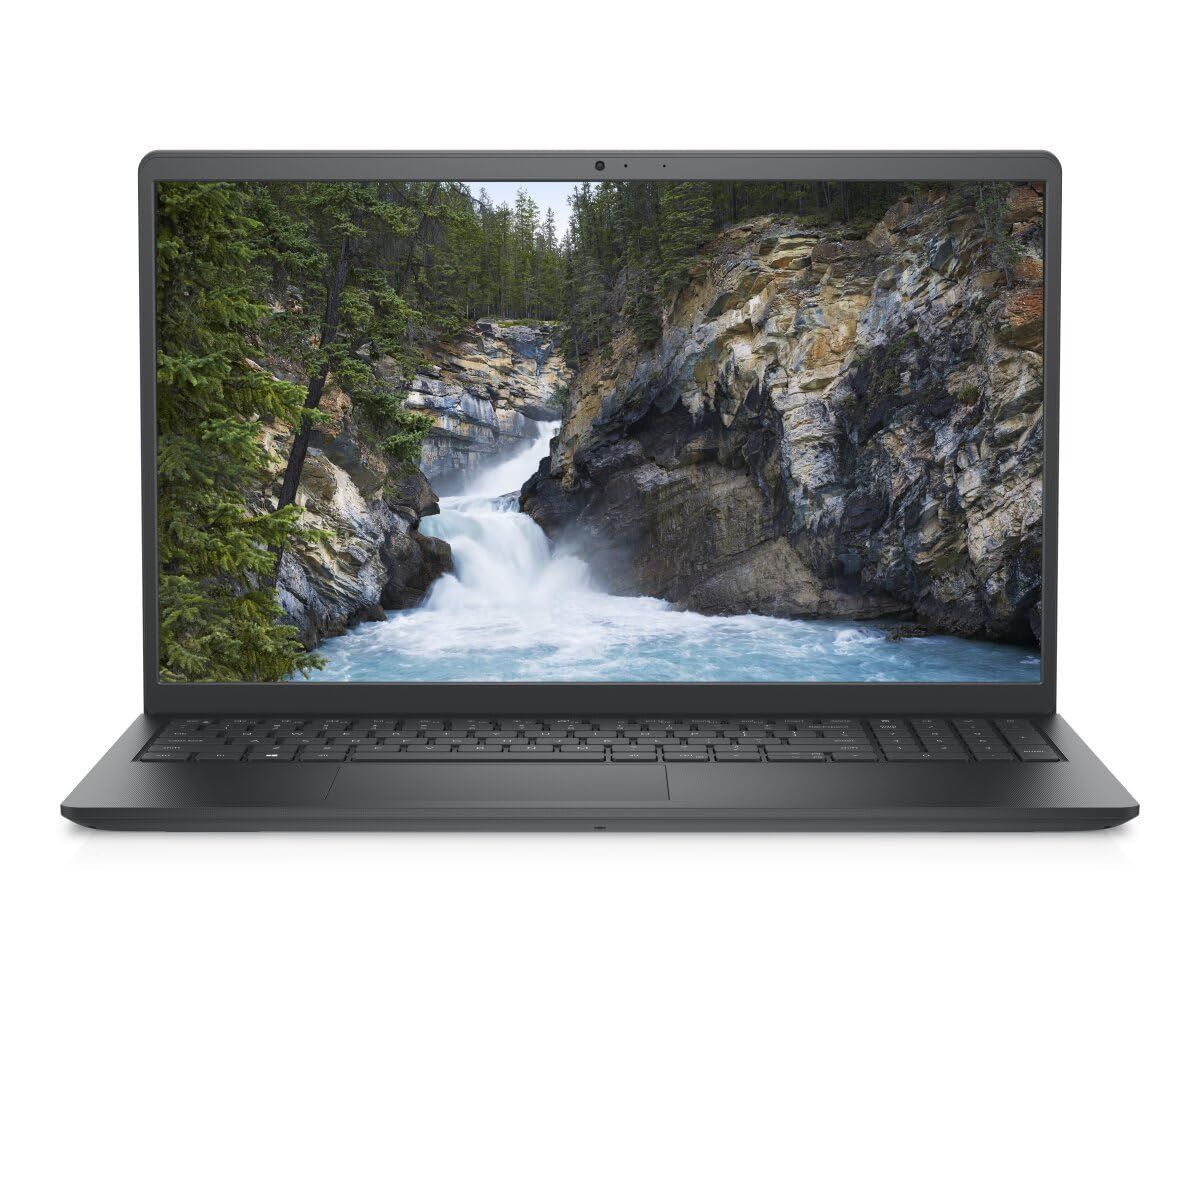 Laptop Dell Vostro 3520, 15.6 inch FHD (1920 x 1080) 120Hz 250 nits WVA Anti-Glare LED Backlit Narrow Border Display, Carbon Palmrest without Finger Print Reader, without Type C Reader, Carbon Black, 12th Generation Intel(R) Core(TM) i3-1215U (10MB Cache, up to 4.4 GHz, 6 cores), Intel(R) UHDx_2